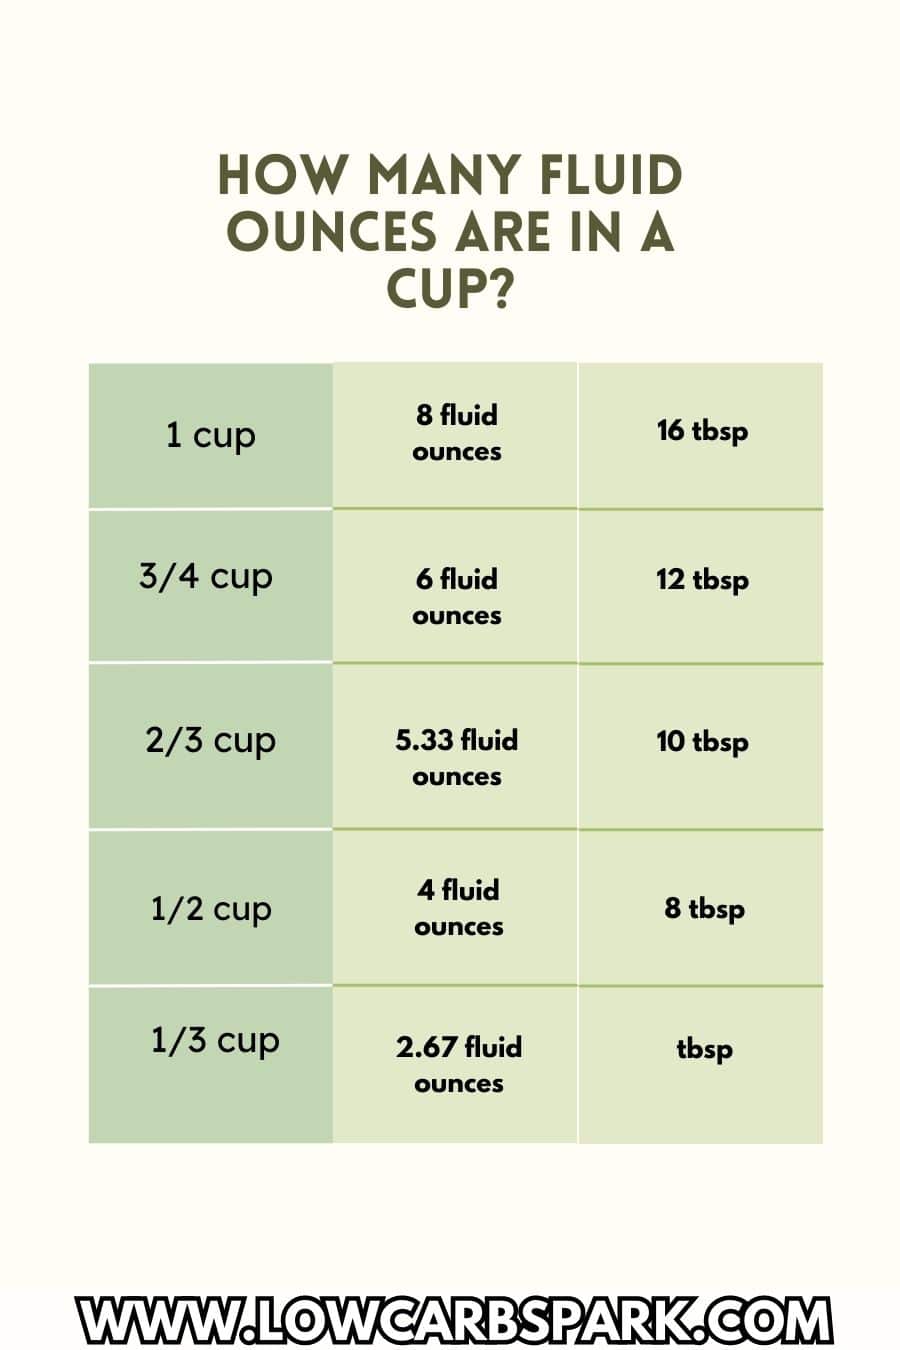 How Many Fluid Ounces Are In A Cup?